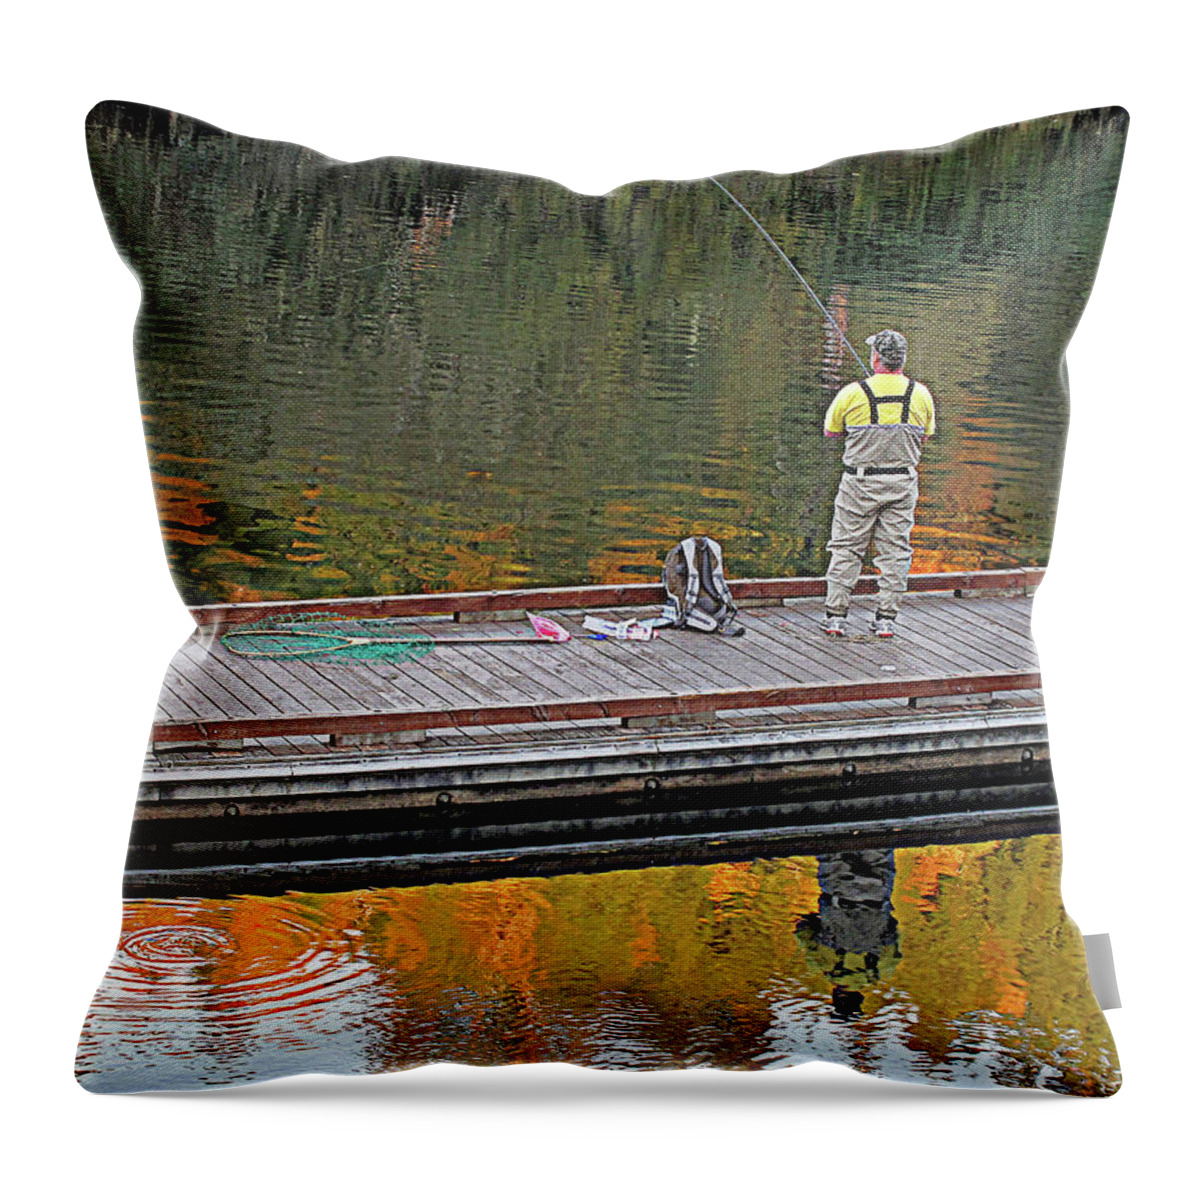 Fishing Throw Pillow featuring the photograph Skunked by Suzy Piatt